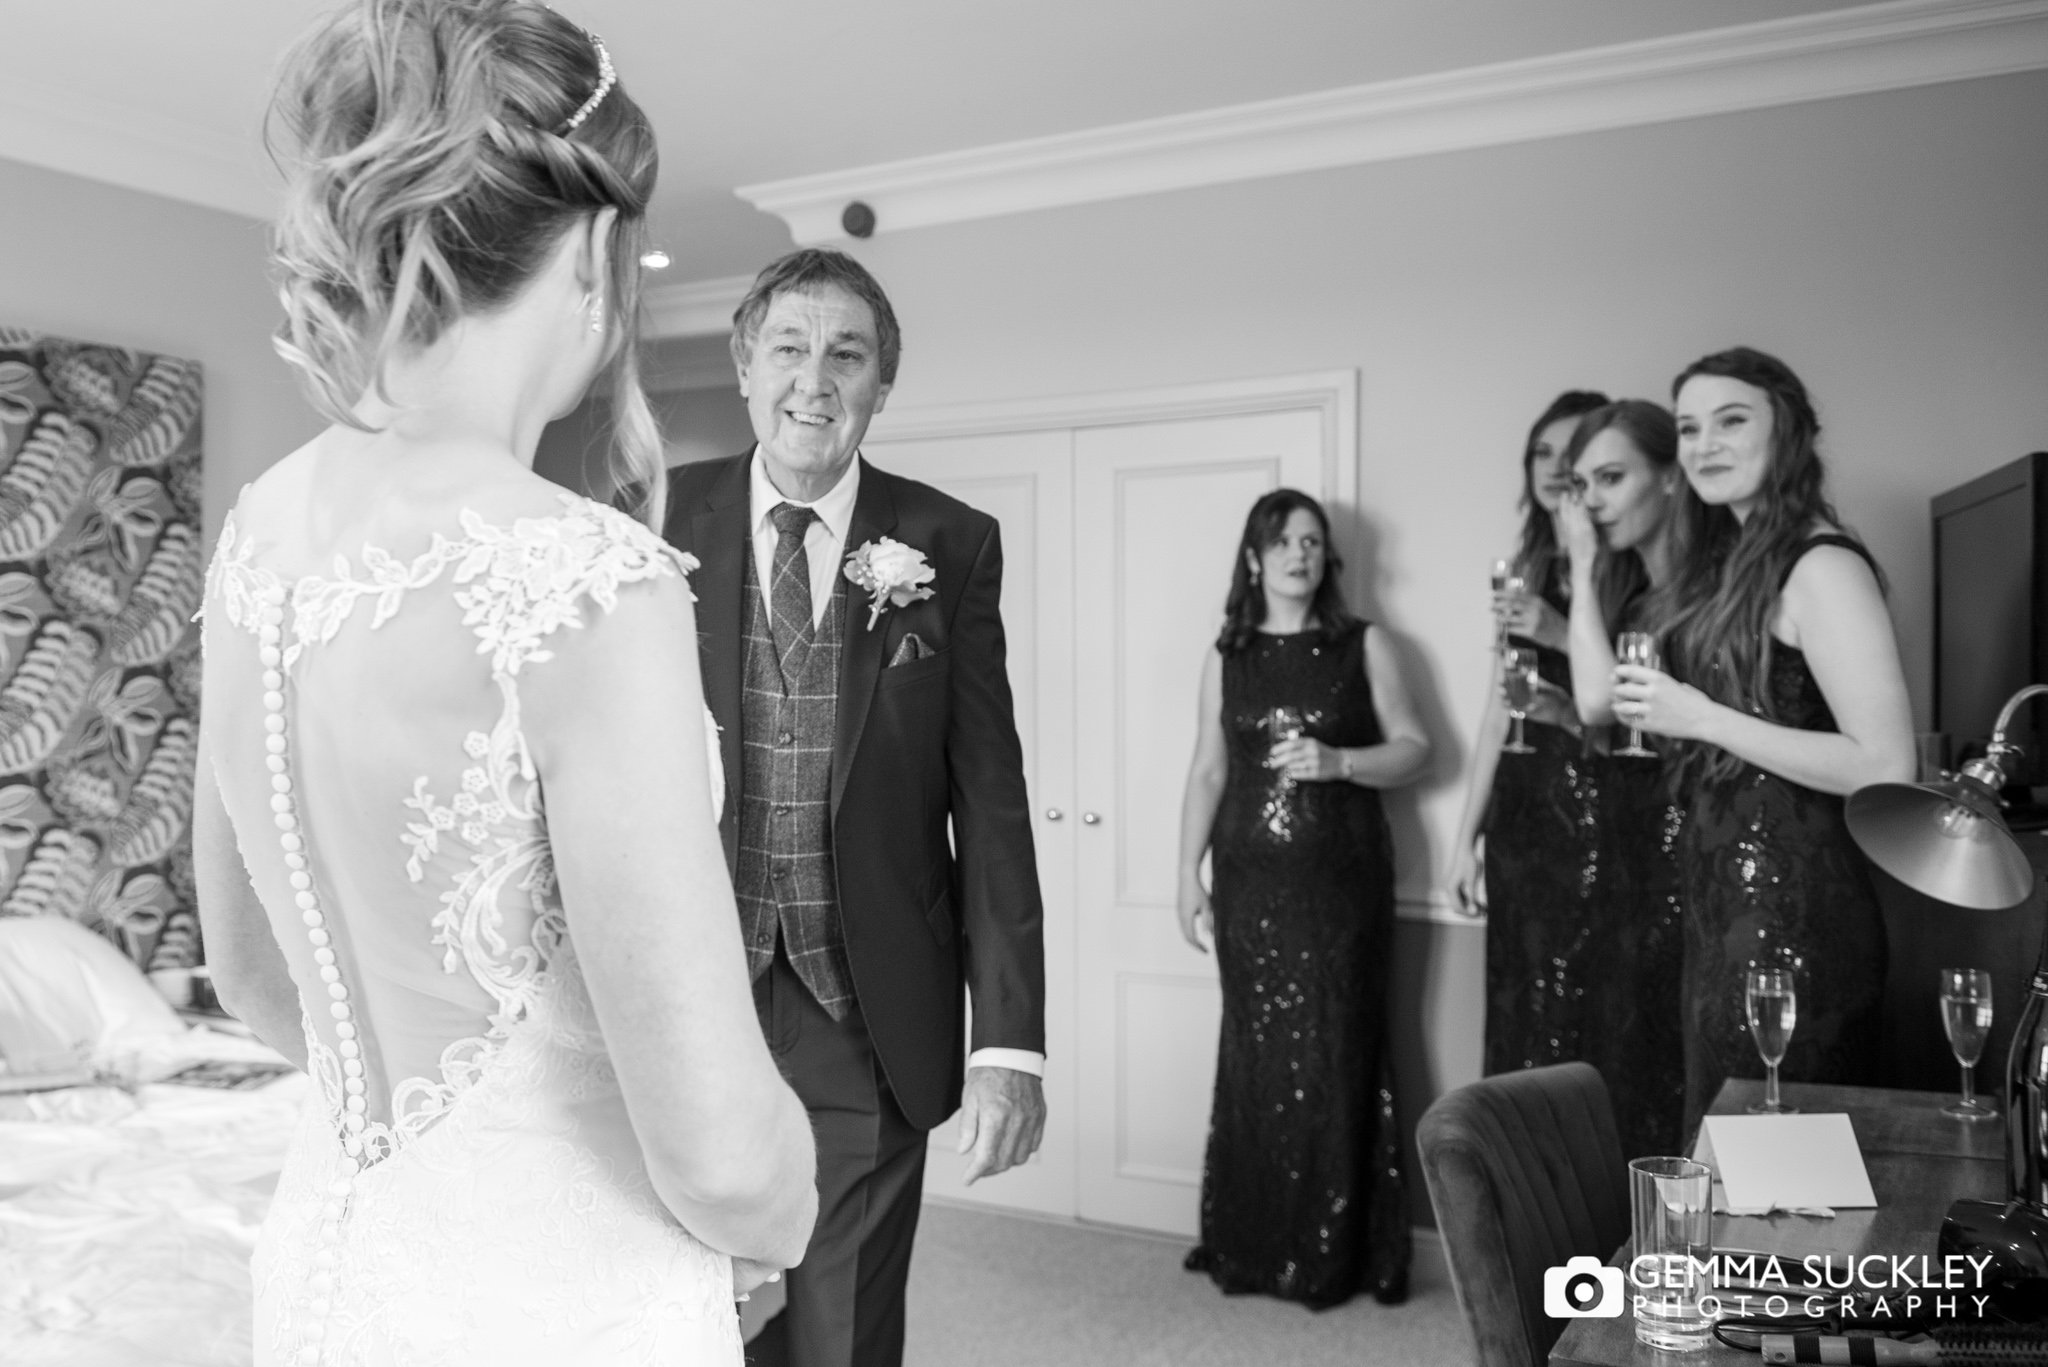 the father of the bride looking at his daughter  in her dress